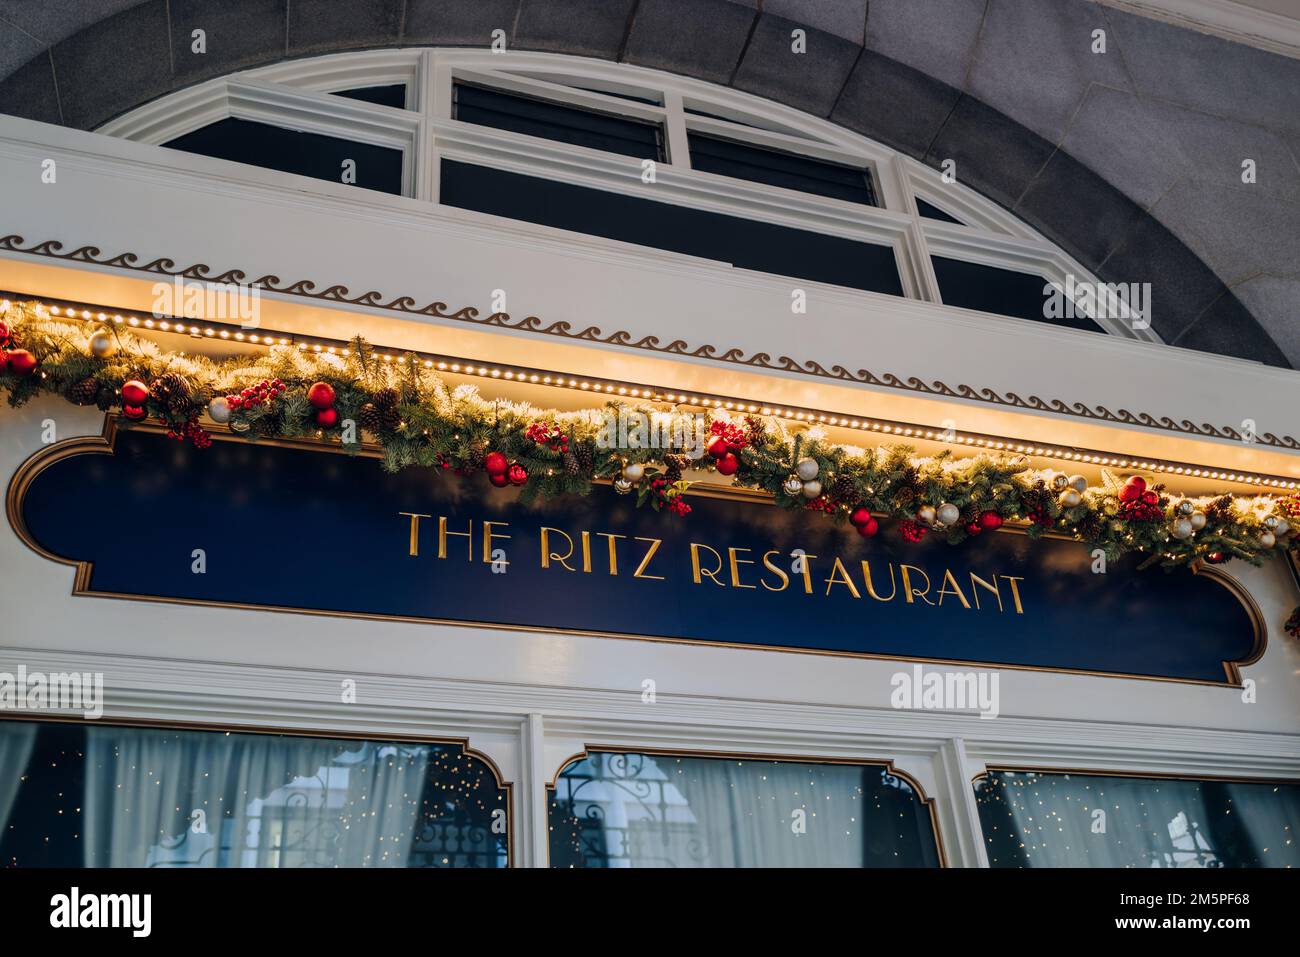 London, UK - December 26, 2022: Festive decorated sign outside The Ritz Restaurant, high-end British–French dining in baroque-style gilded salon with Stock Photo